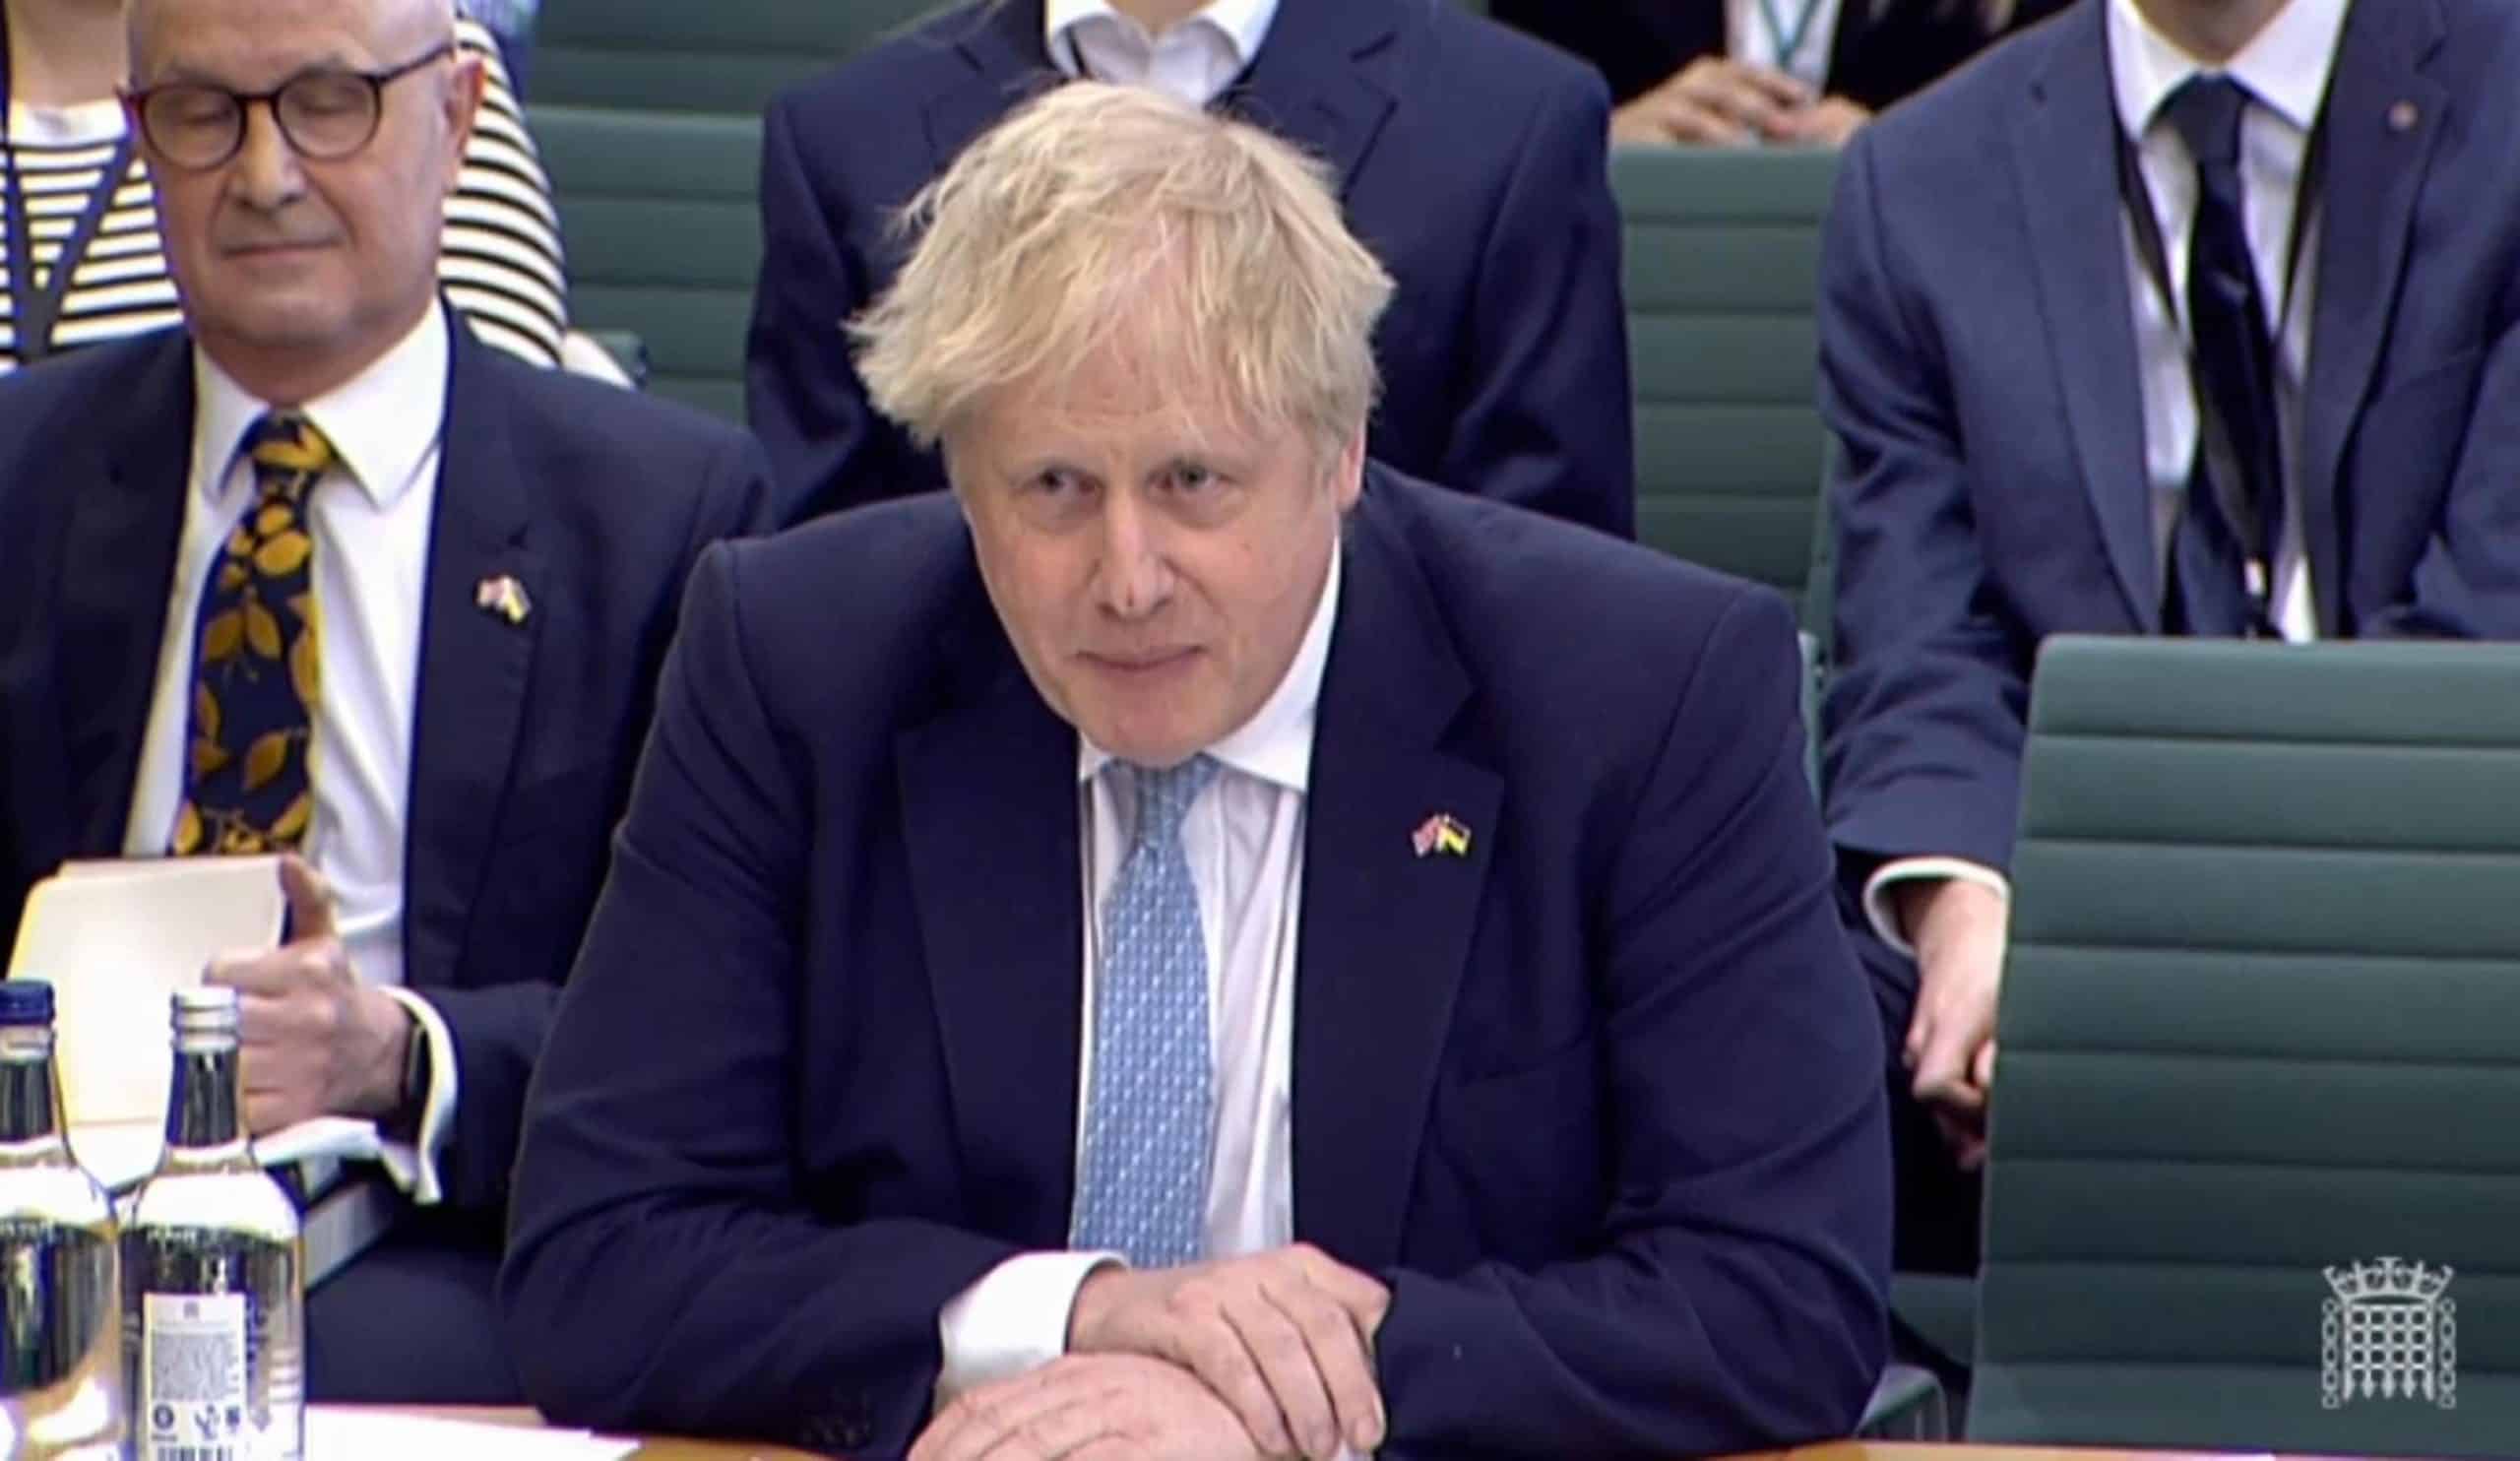 MP runs rings around Johnson over partygate as he proclaims: ‘You thought you’d got away with it, didn’t you?’